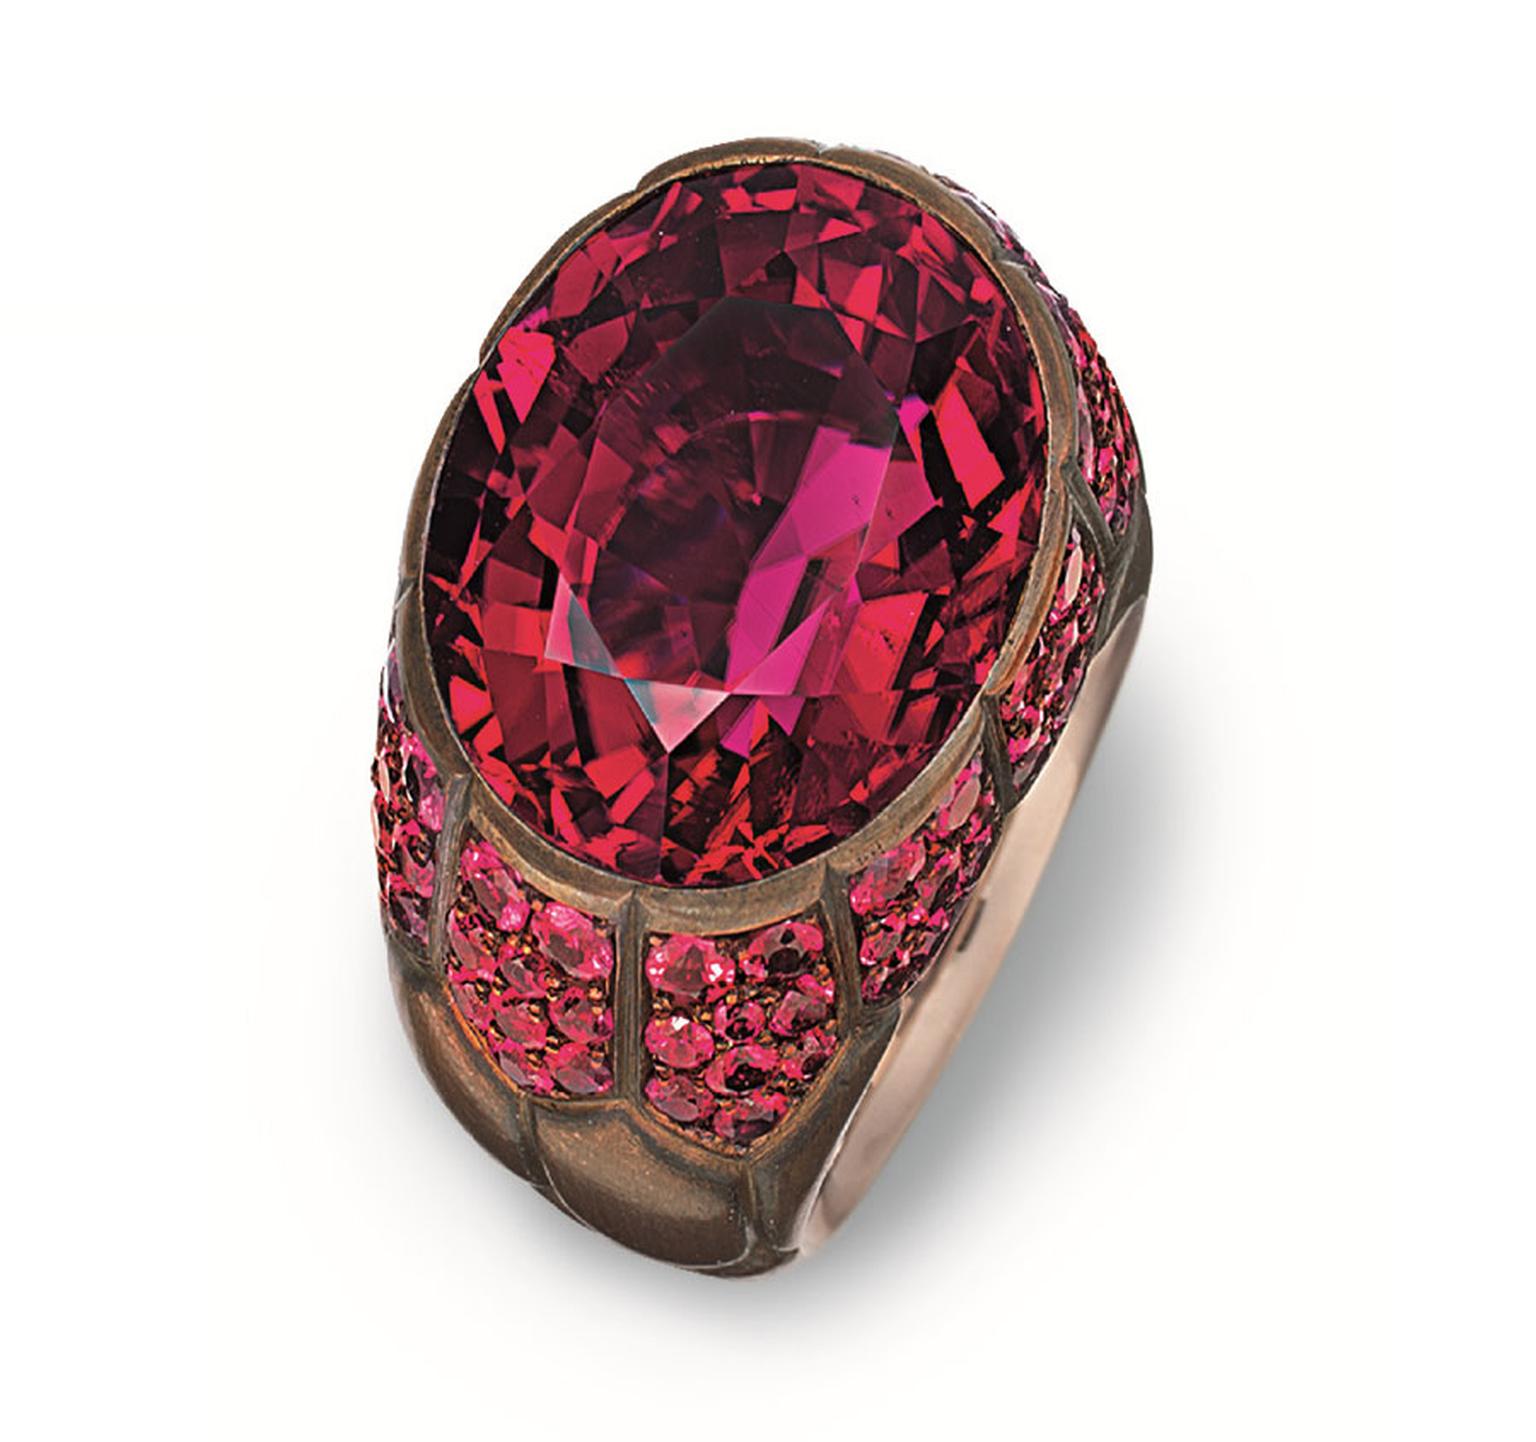 MPL-2013-Hemmerle-Brown-patinated-copper-white-gold-Rubellite-spinels-ring.jpg